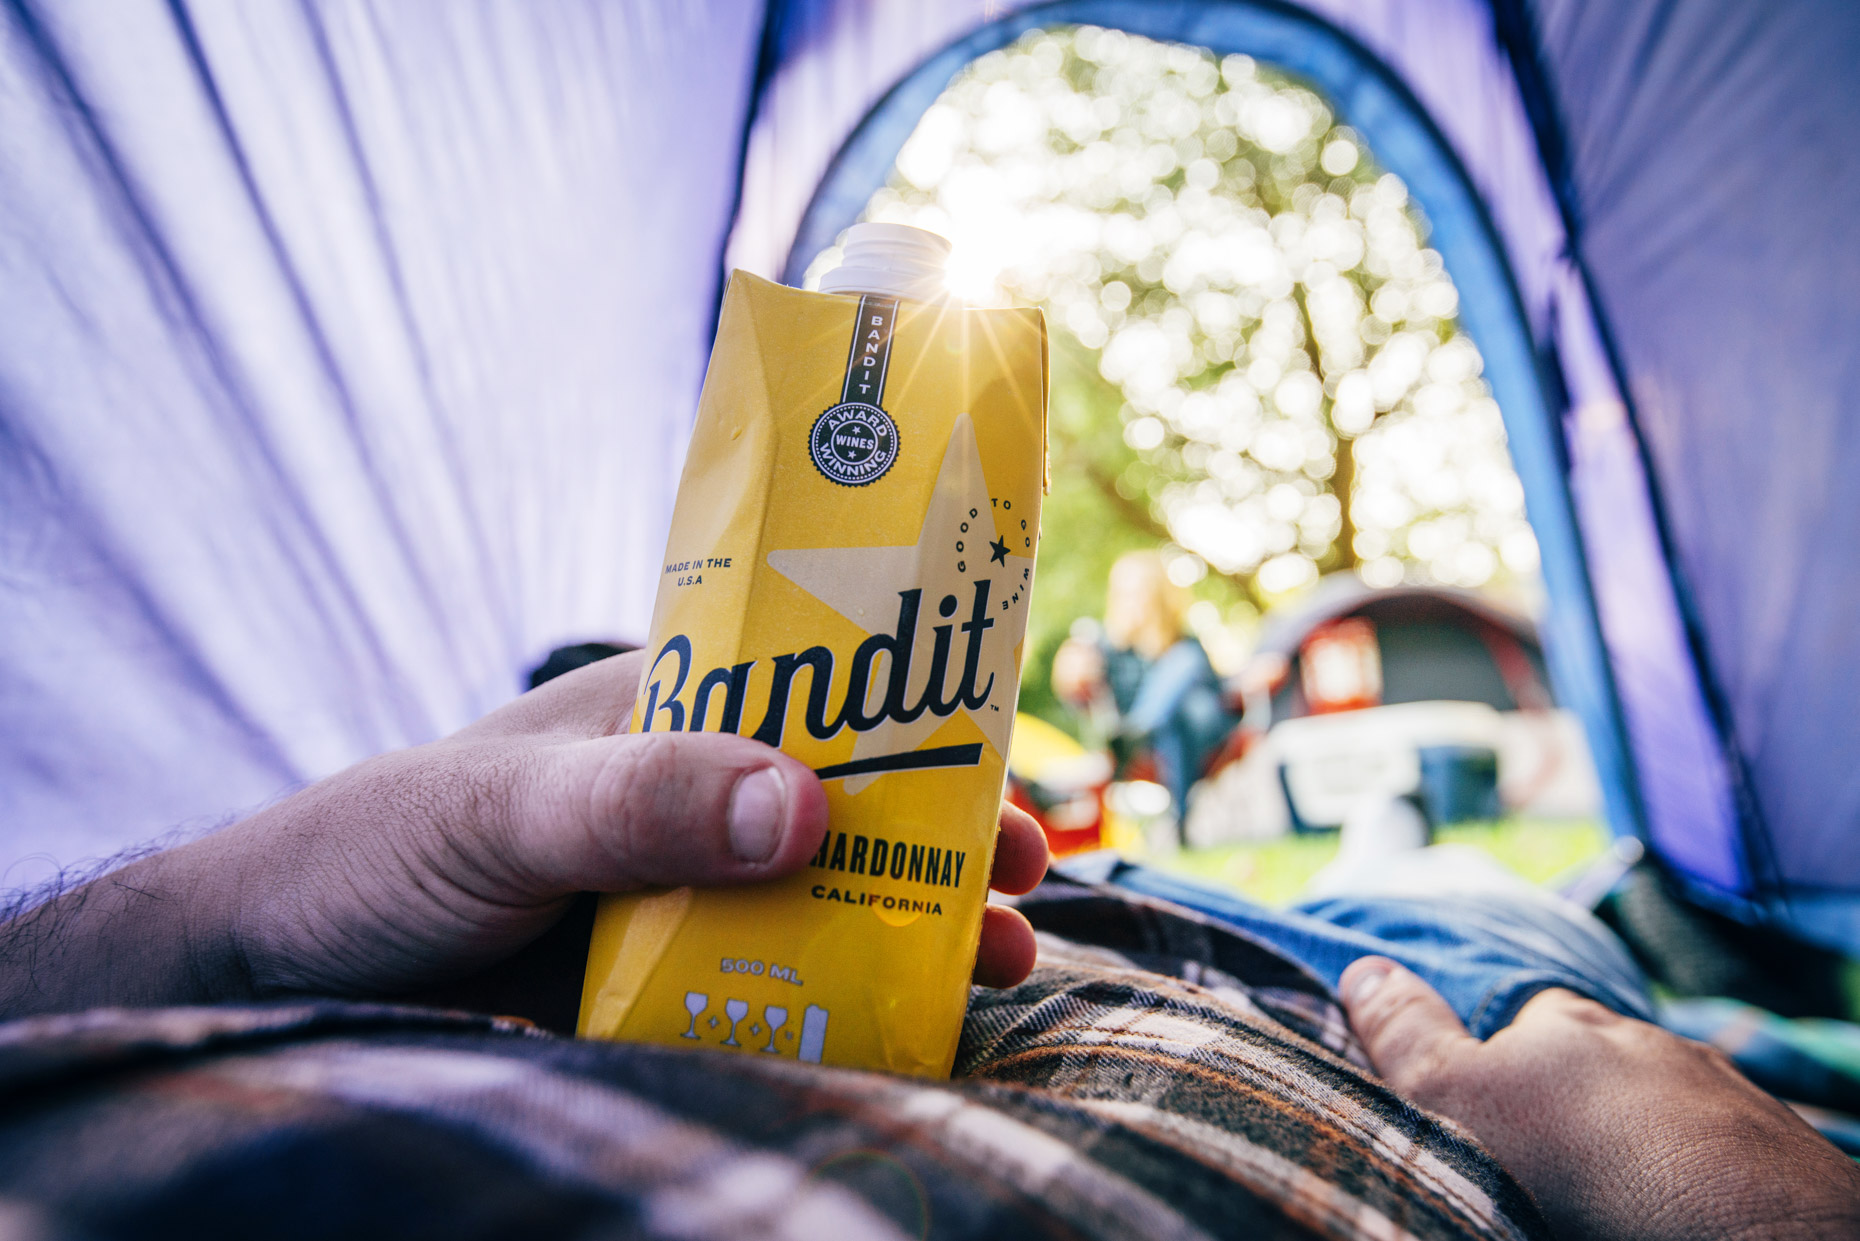 Man relaxing in tent with box of Bandit Chardonnay wine